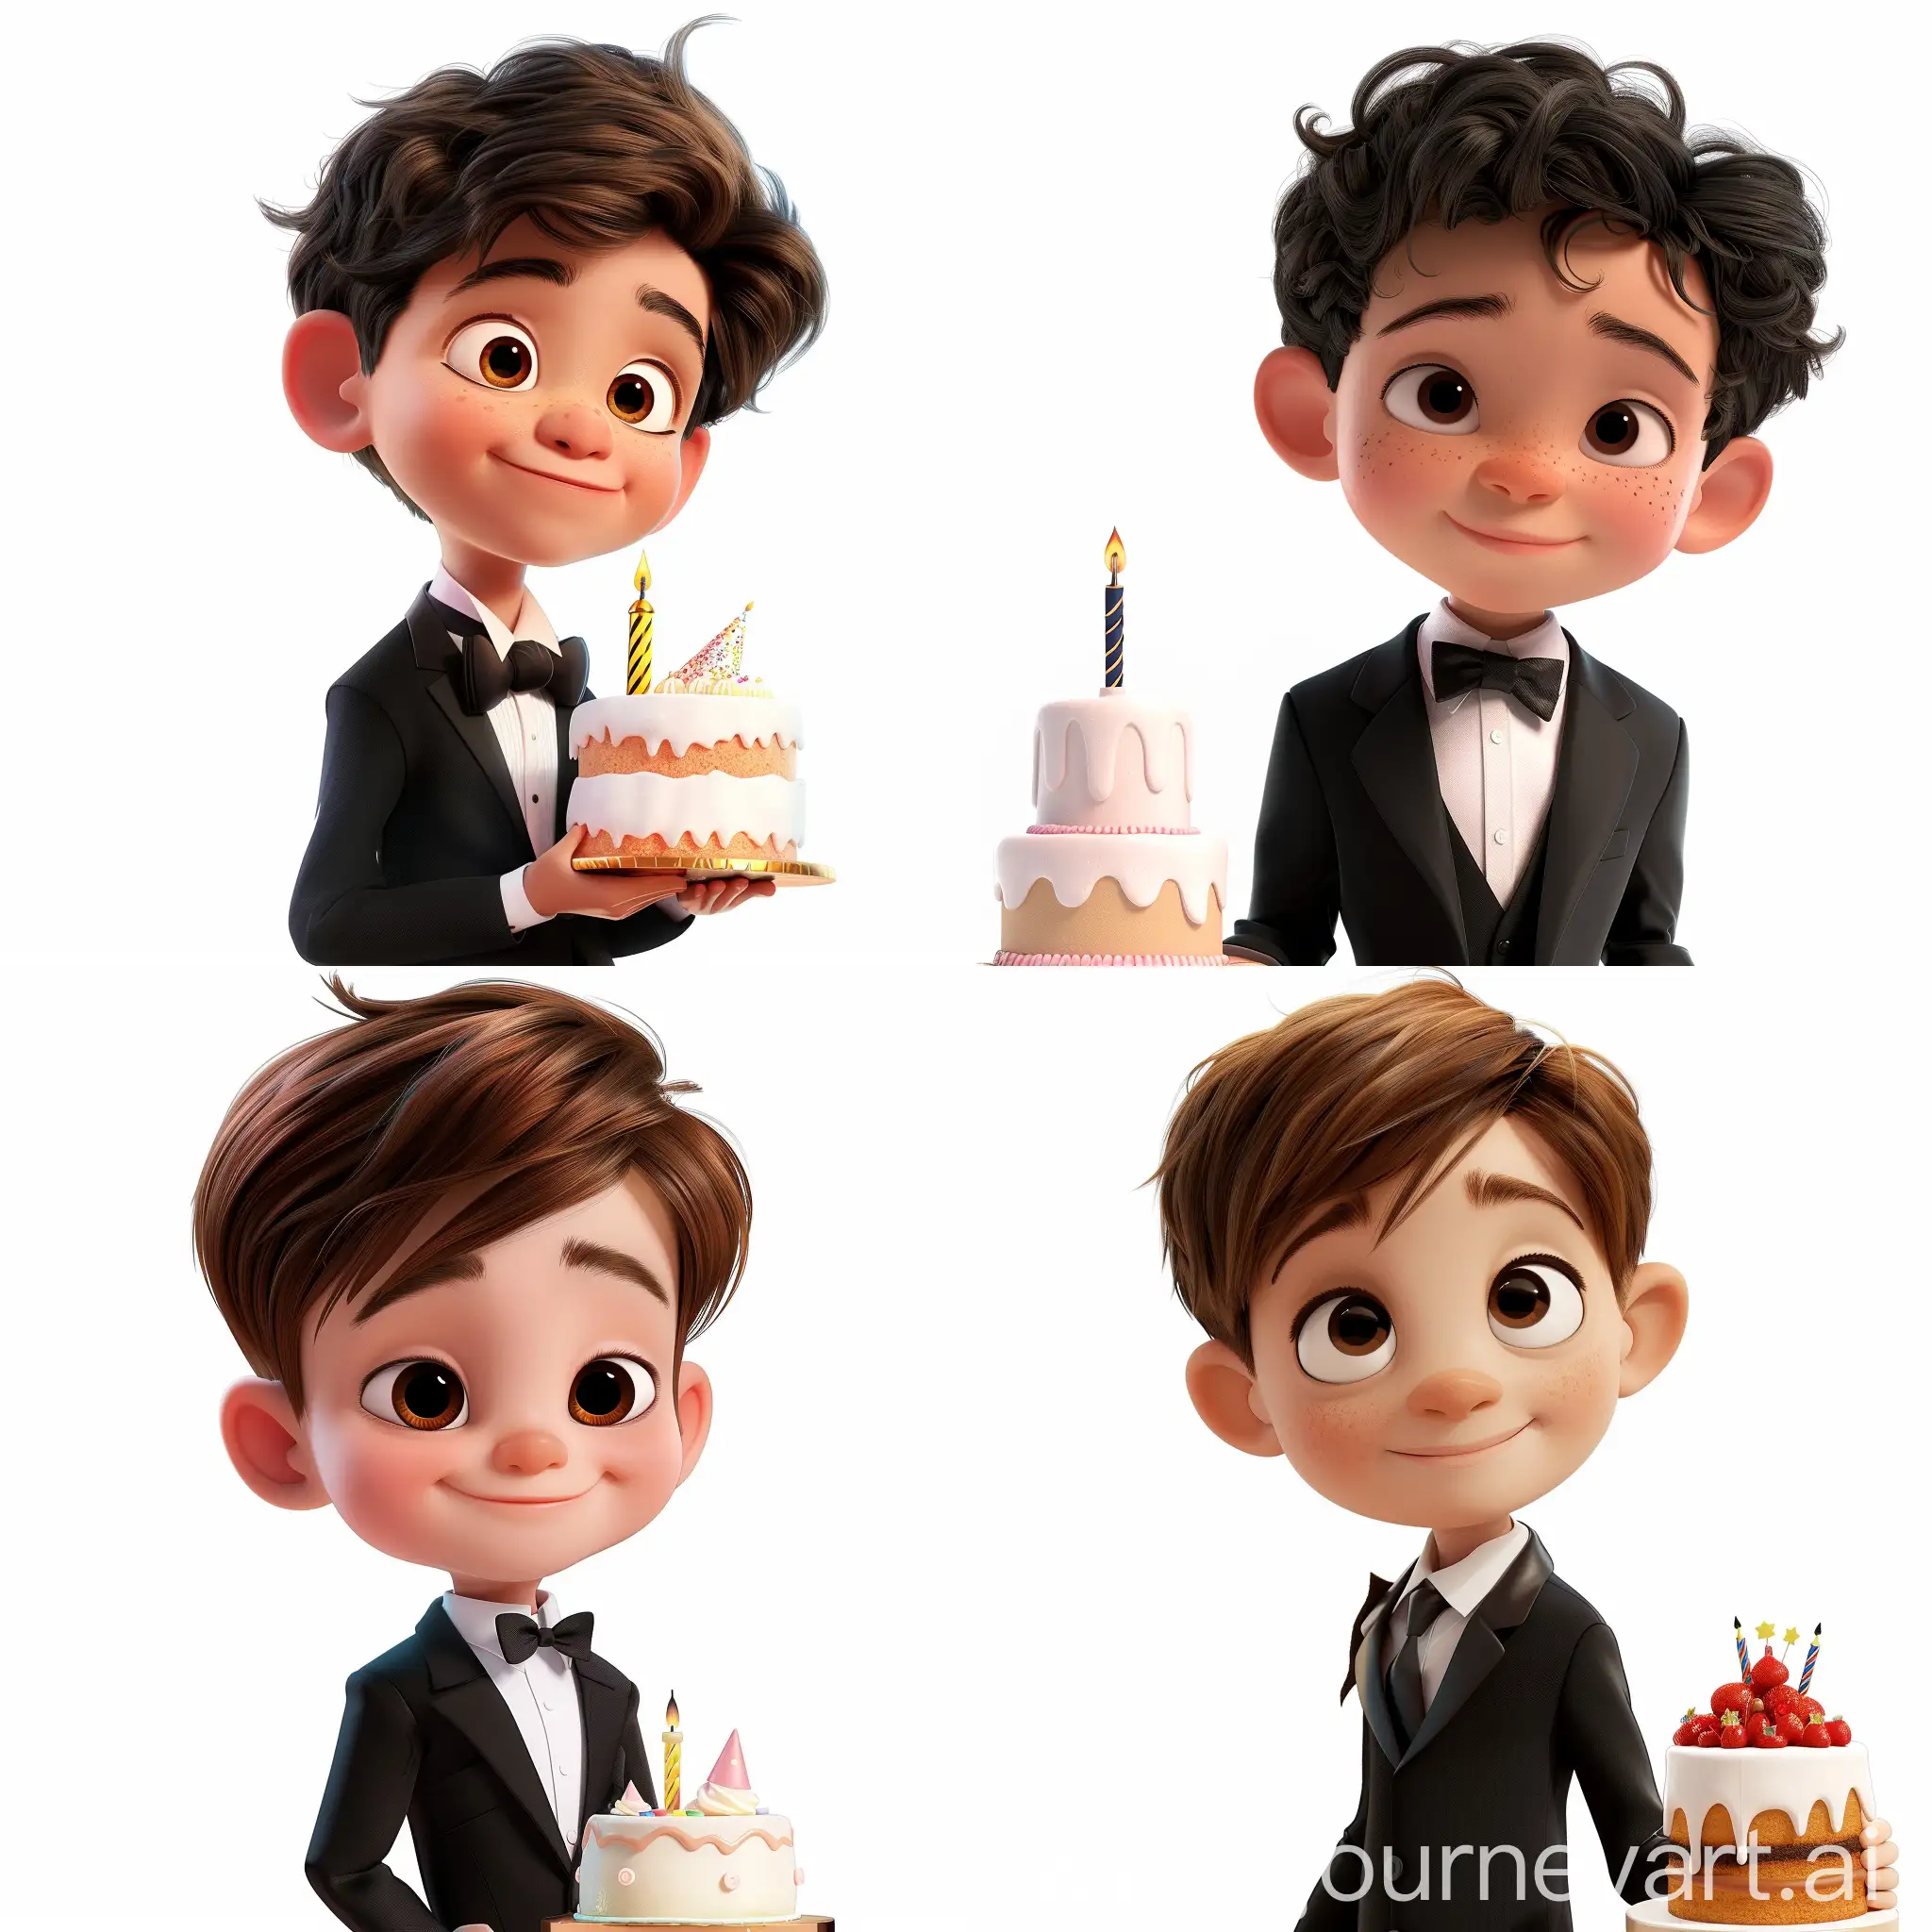 Cartoons a close-up shot of a happy little boy with a birthday cake, looking at the camera, standing tall, in formal attire, white background